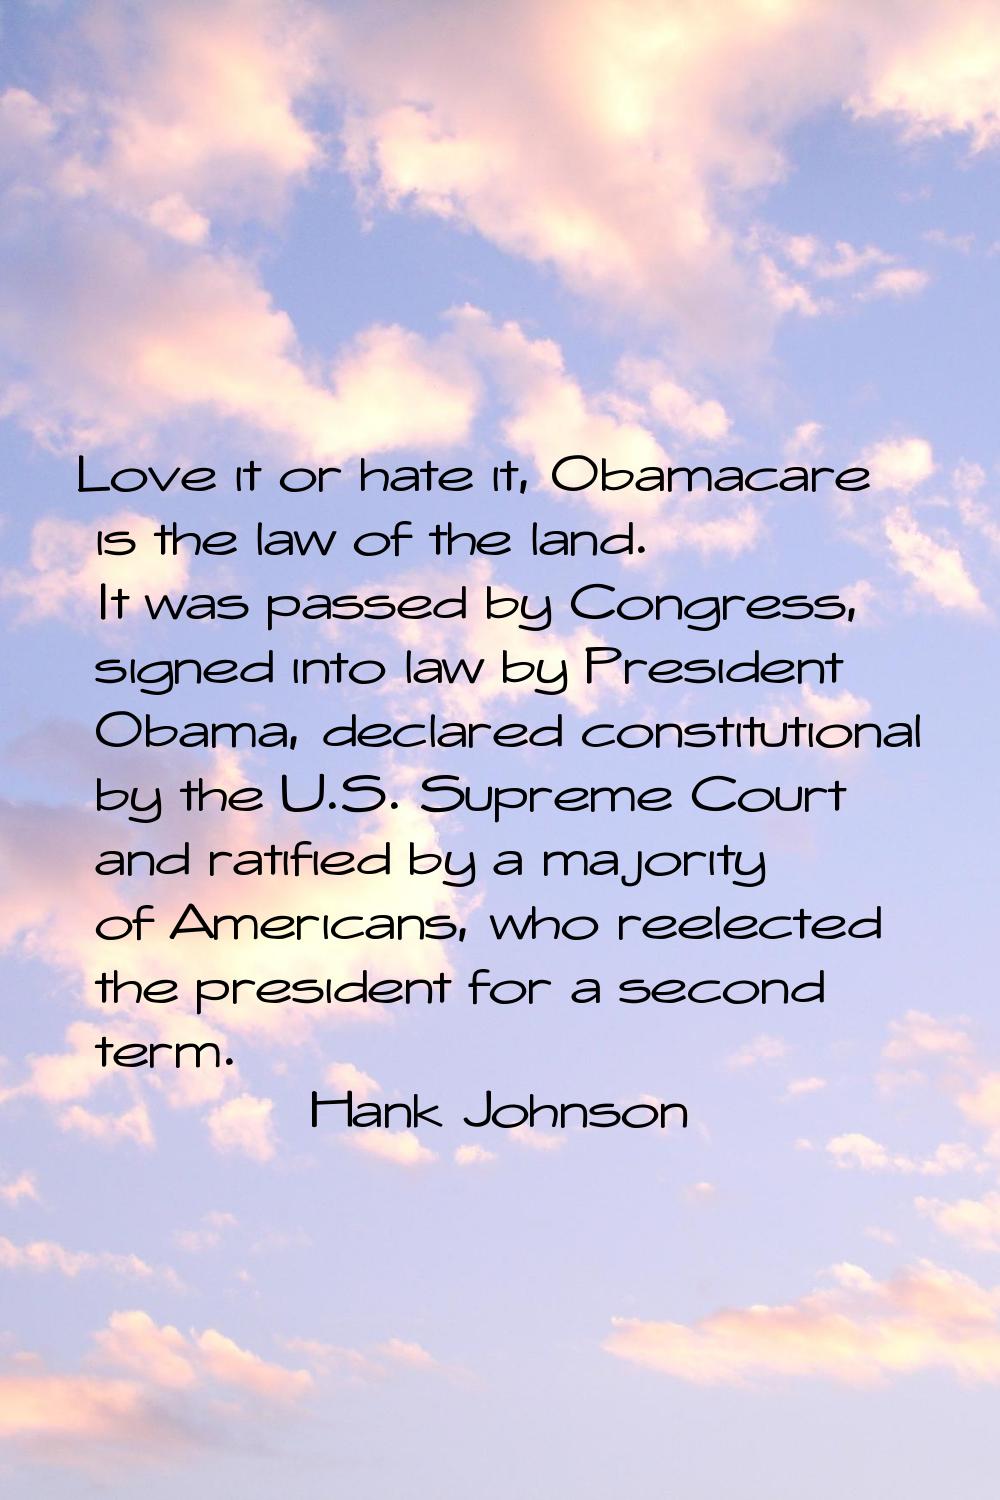 Love it or hate it, Obamacare is the law of the land. It was passed by Congress, signed into law by